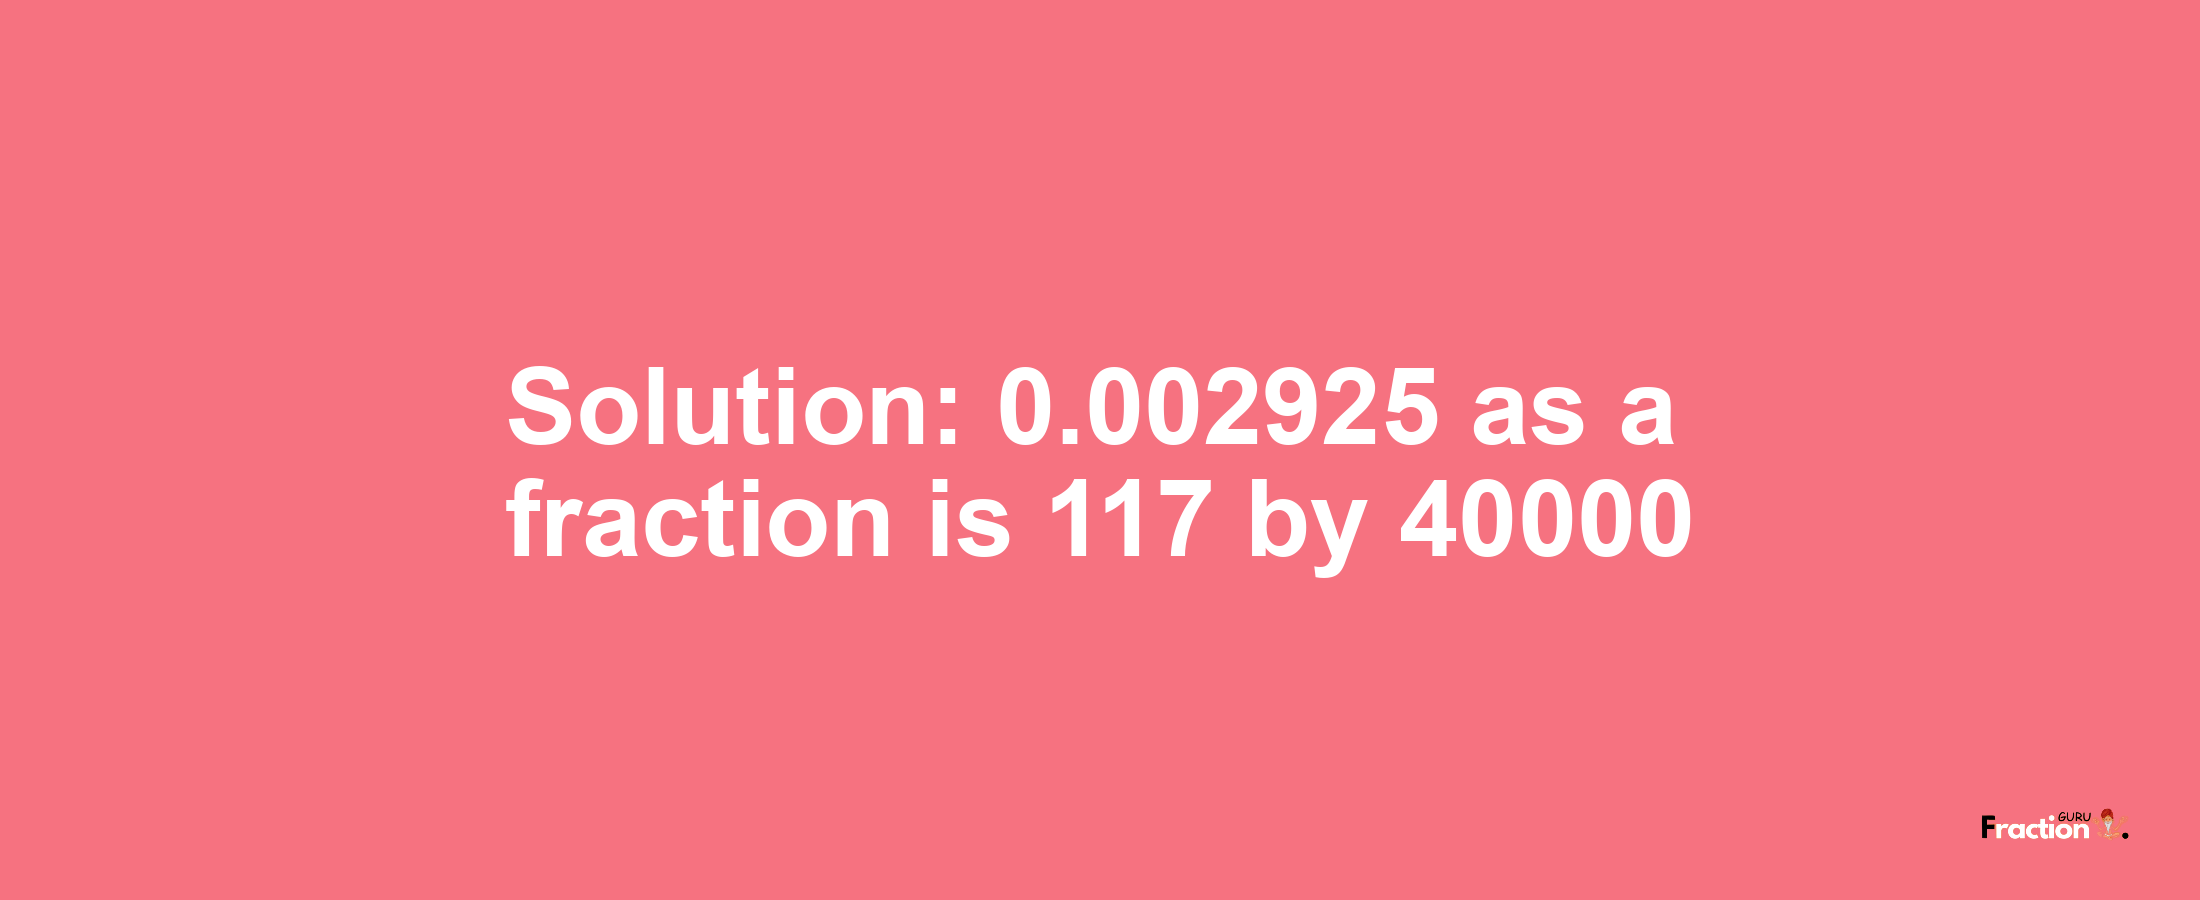 Solution:0.002925 as a fraction is 117/40000